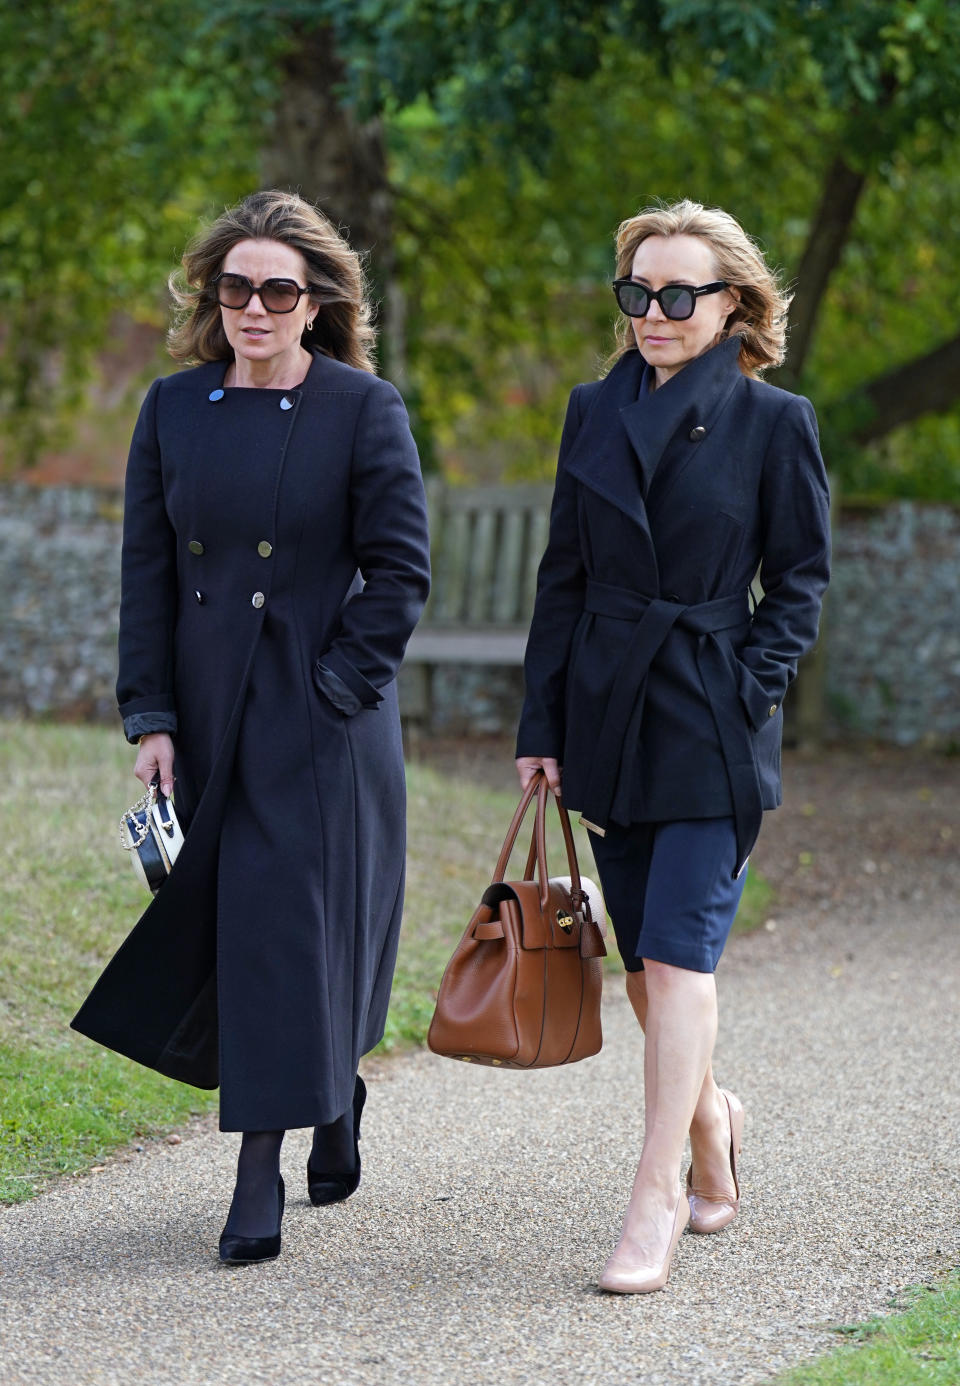 Susanna Reid (left) and Sian Williams arrive for the funeral of TV presenter and journalist Bill Turnbull (Joe Giddens/PA)